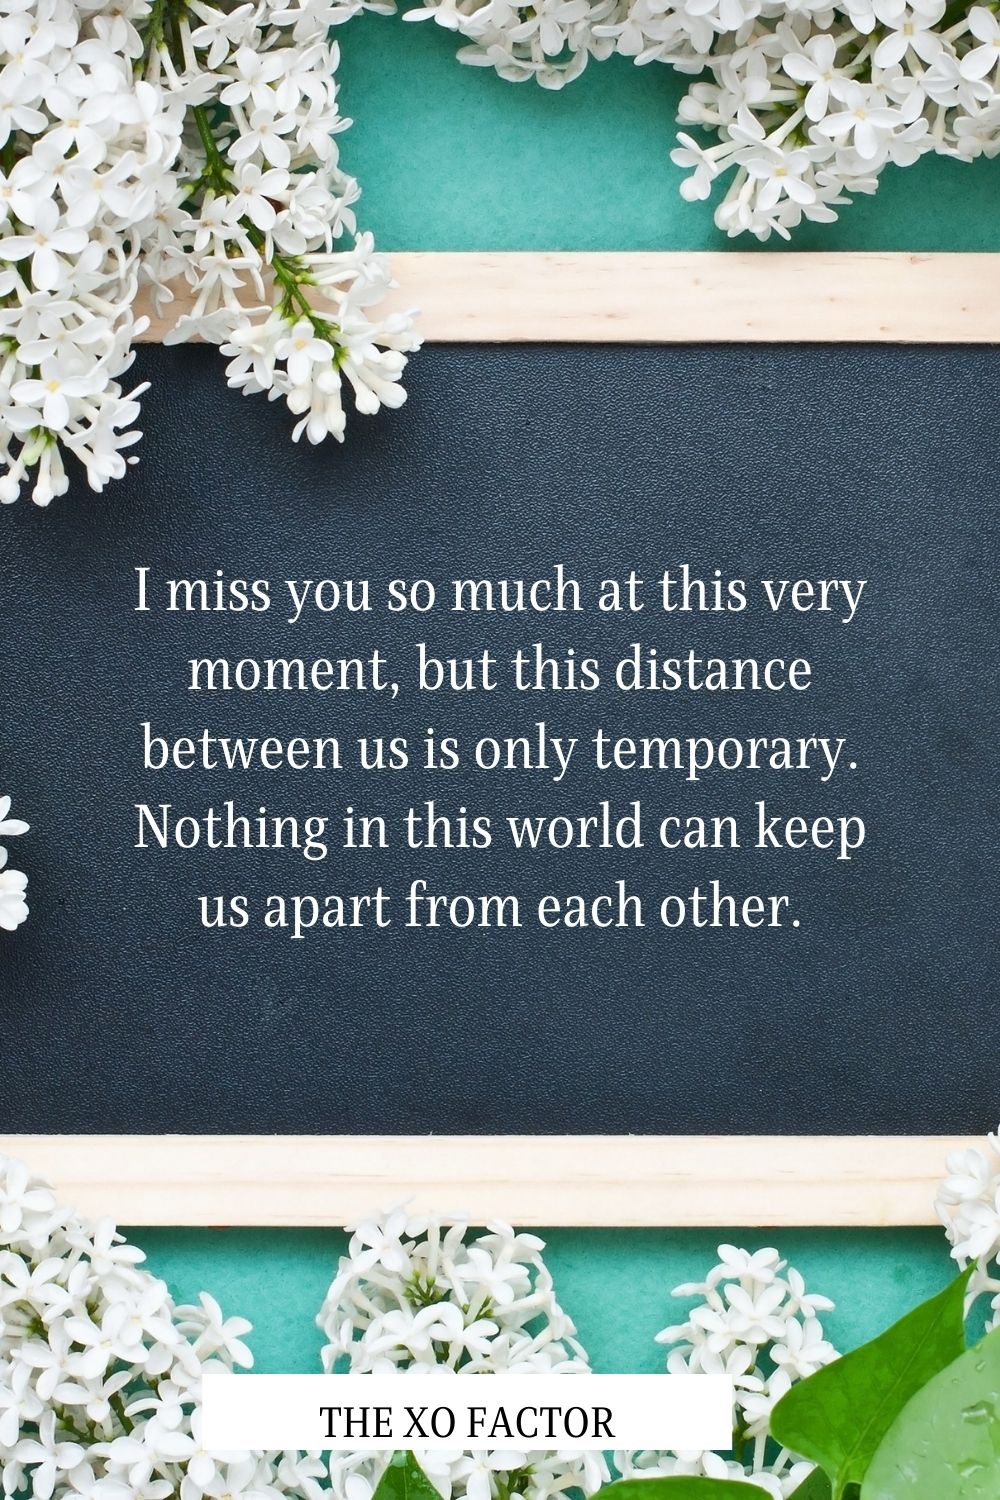 I miss you so much at this very moment, but this distance between us is only temporary. Nothing in this world can keep us apart from each other.